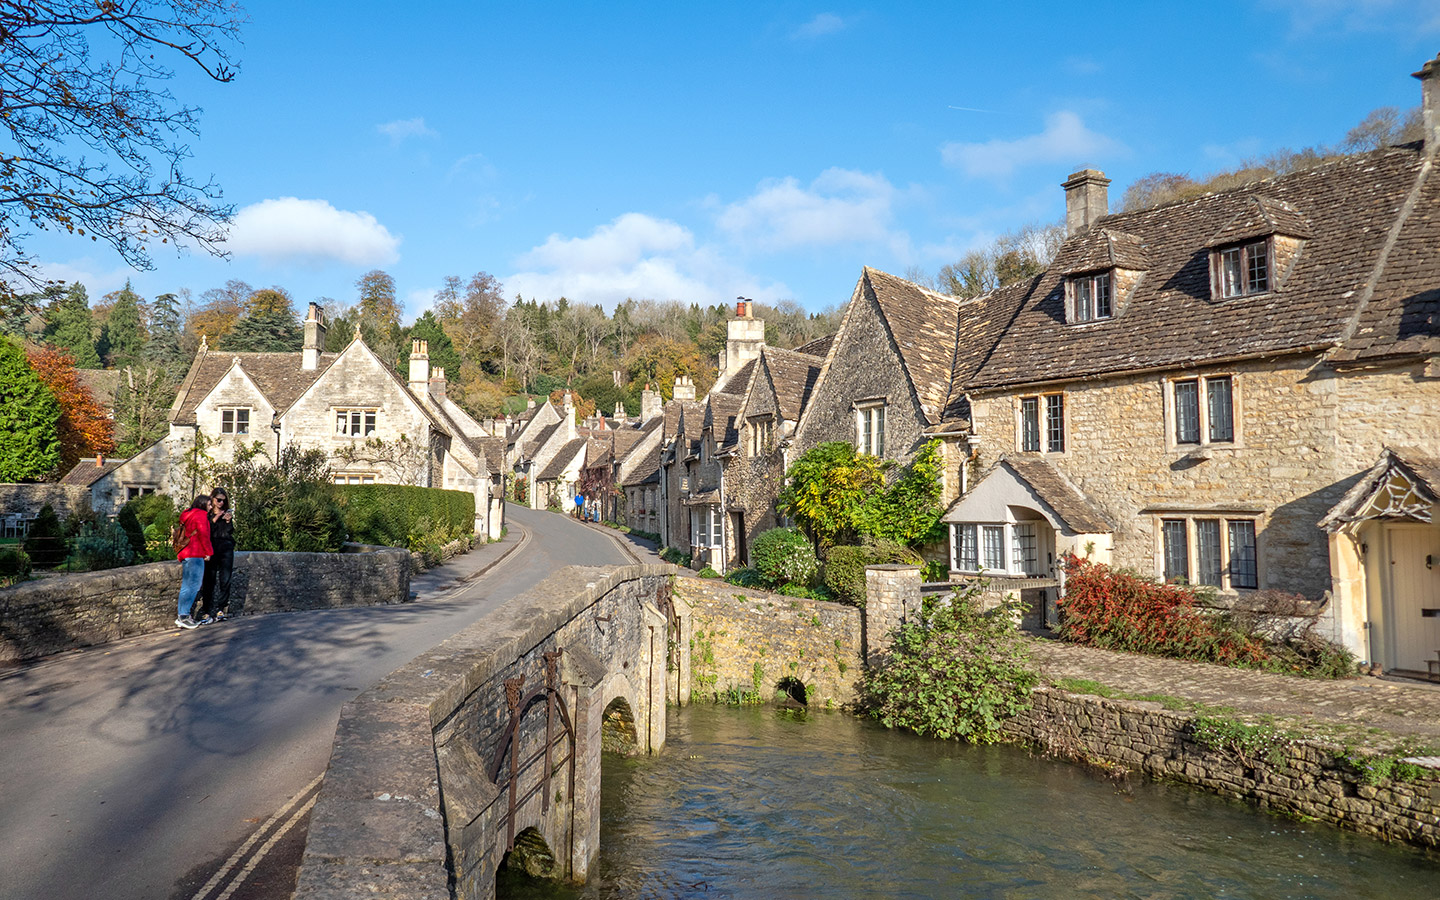 Things to do in Castle Combe, Cotswolds: A local's guide - Explore the Cotswolds